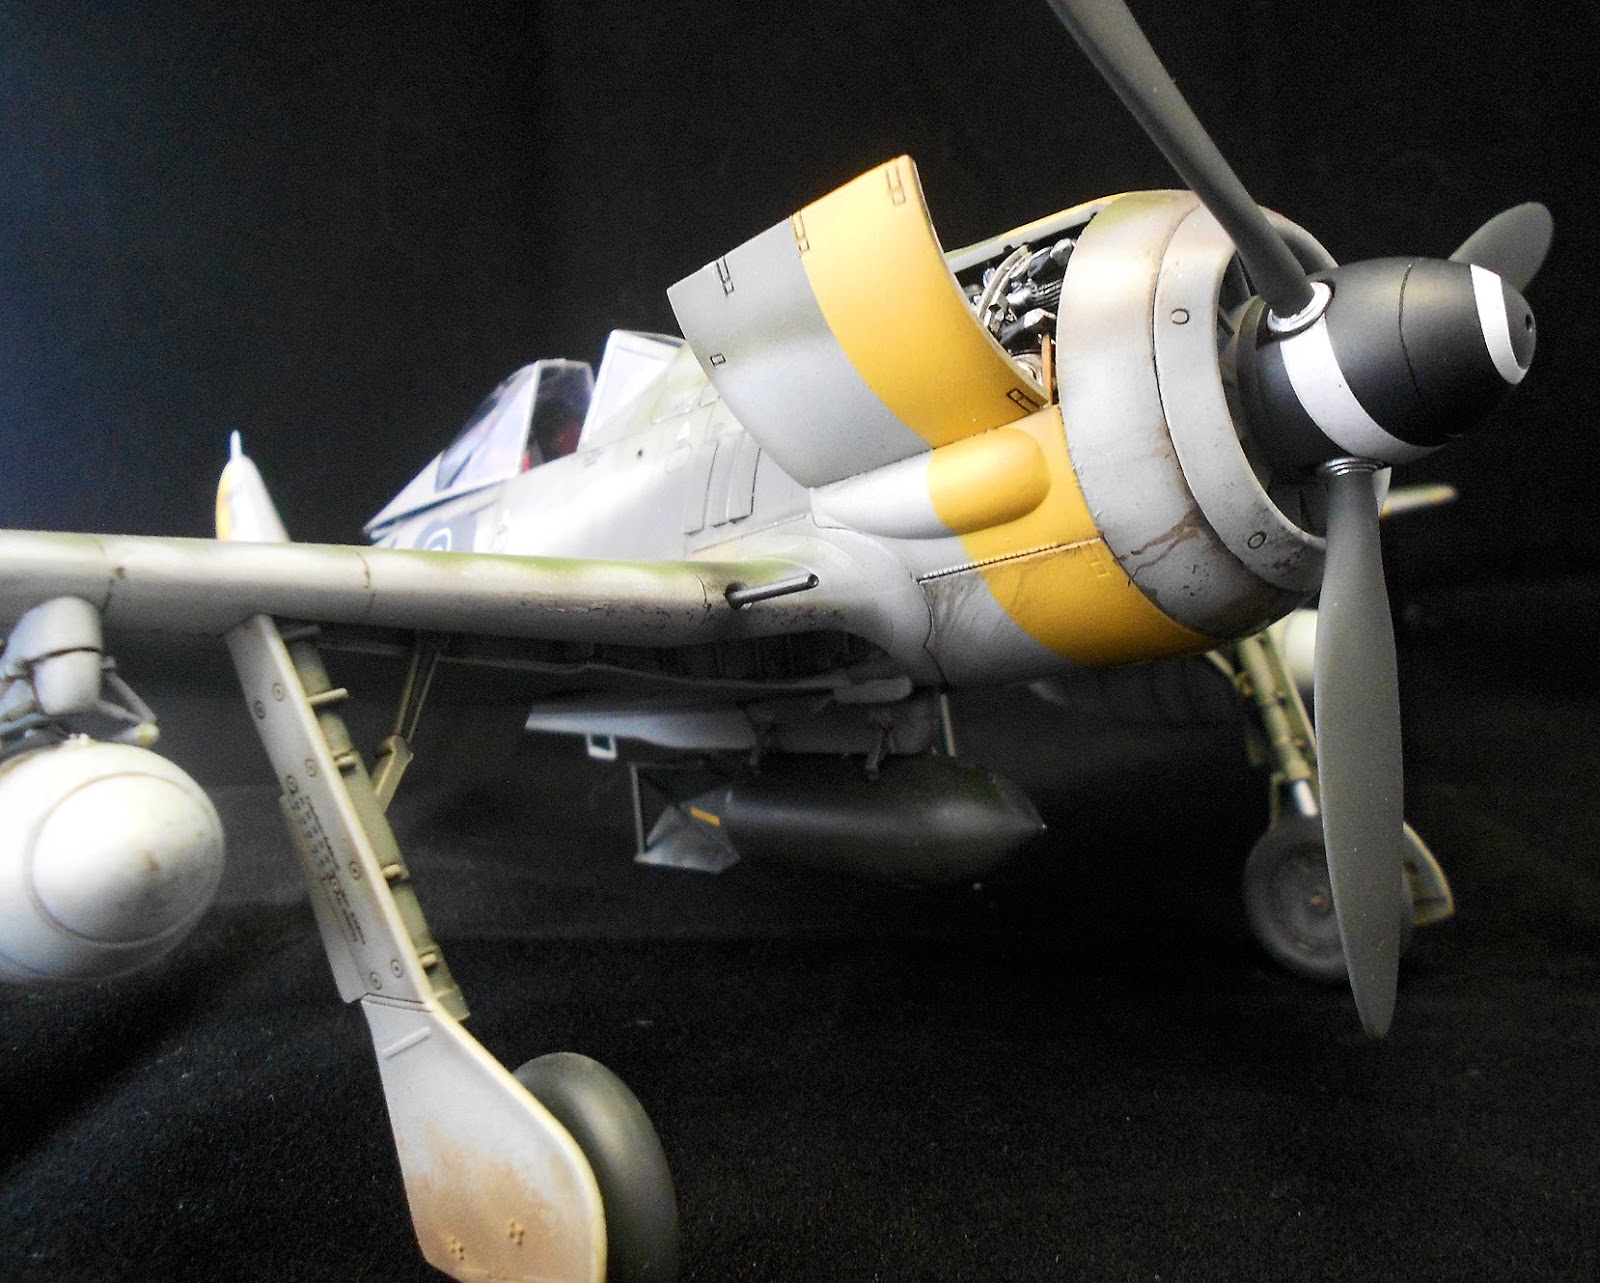 The Modelling News: builds Revell's new 1/32 Focke Wulf FW-190 F8 "Schlachter"